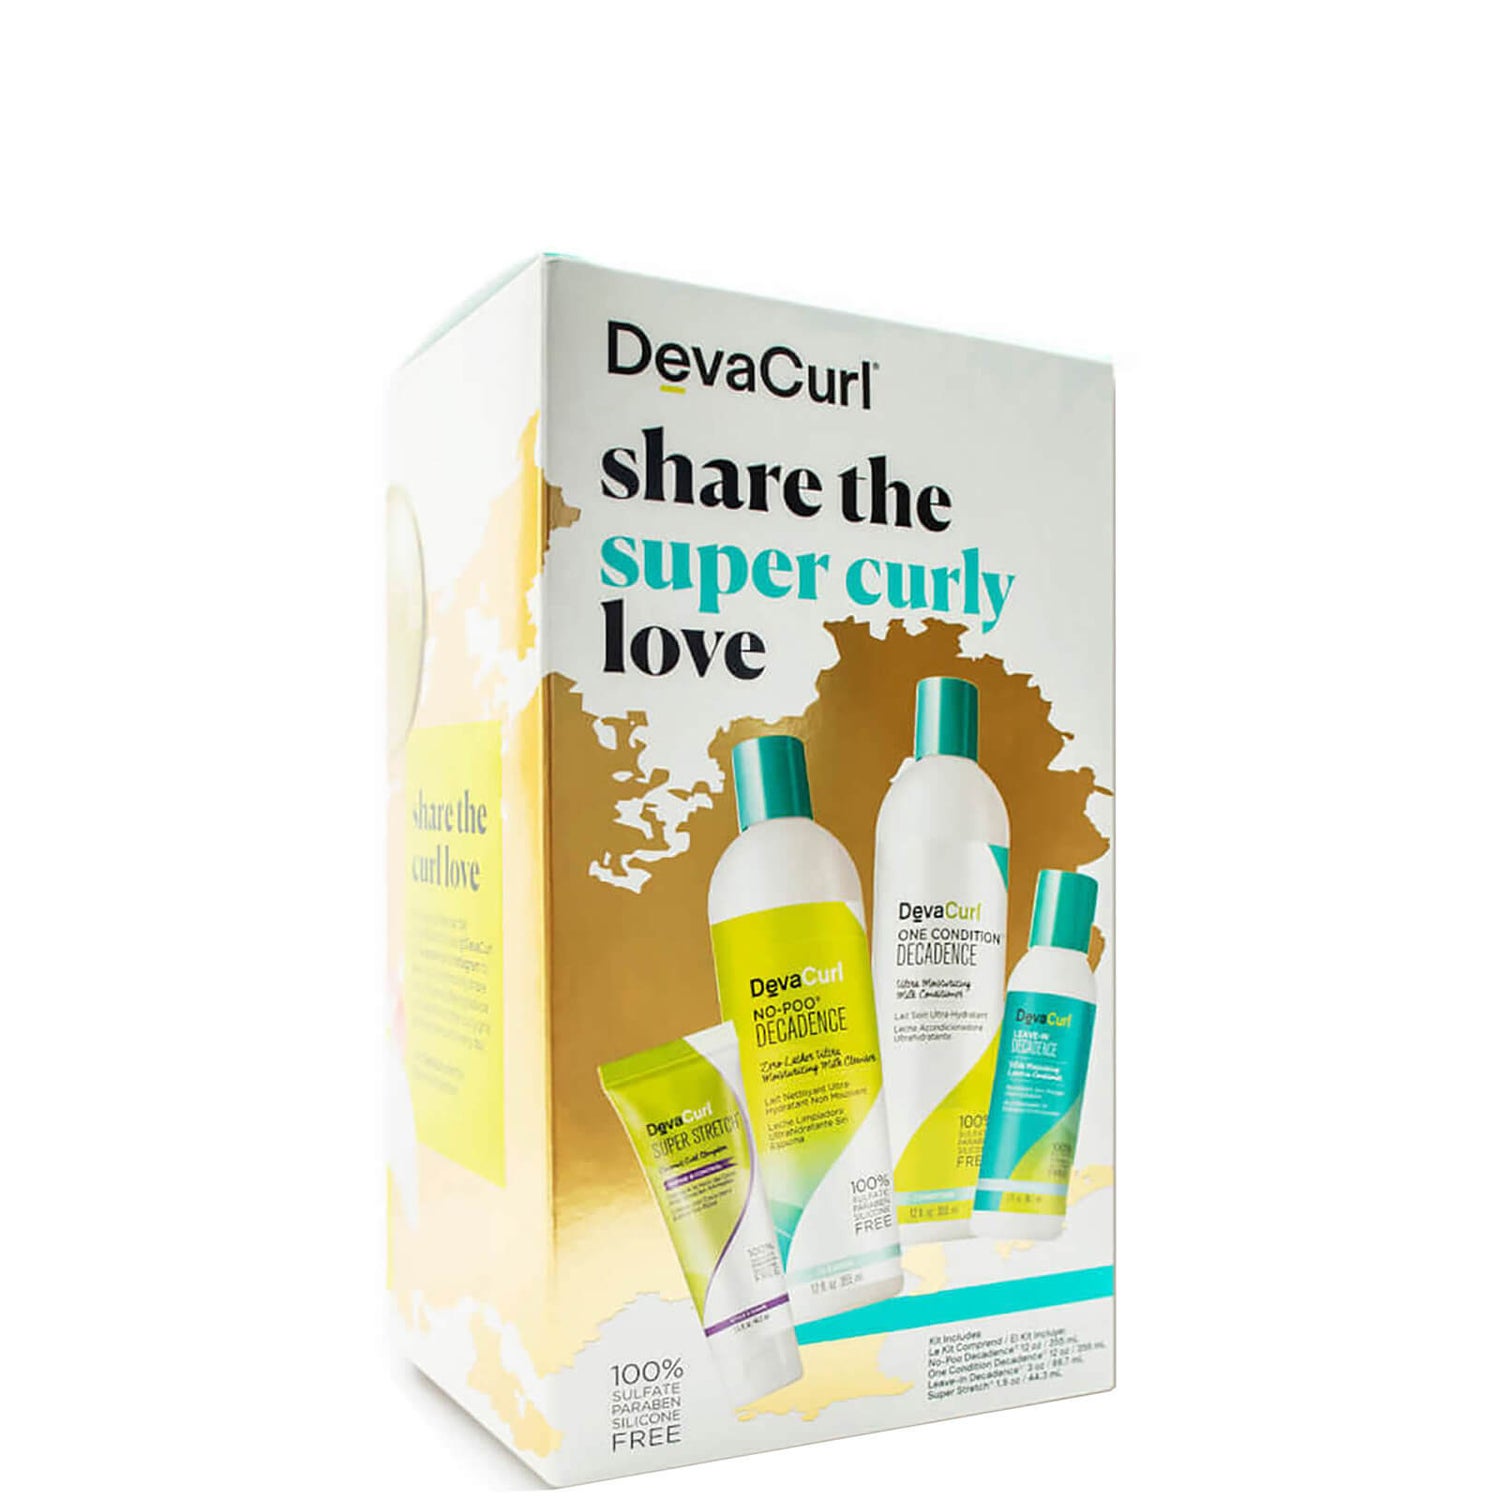 DevaCurl Share the Super Curly Love: Cleanser Conditioner Styler Kit for Curly Hair (4 piece)